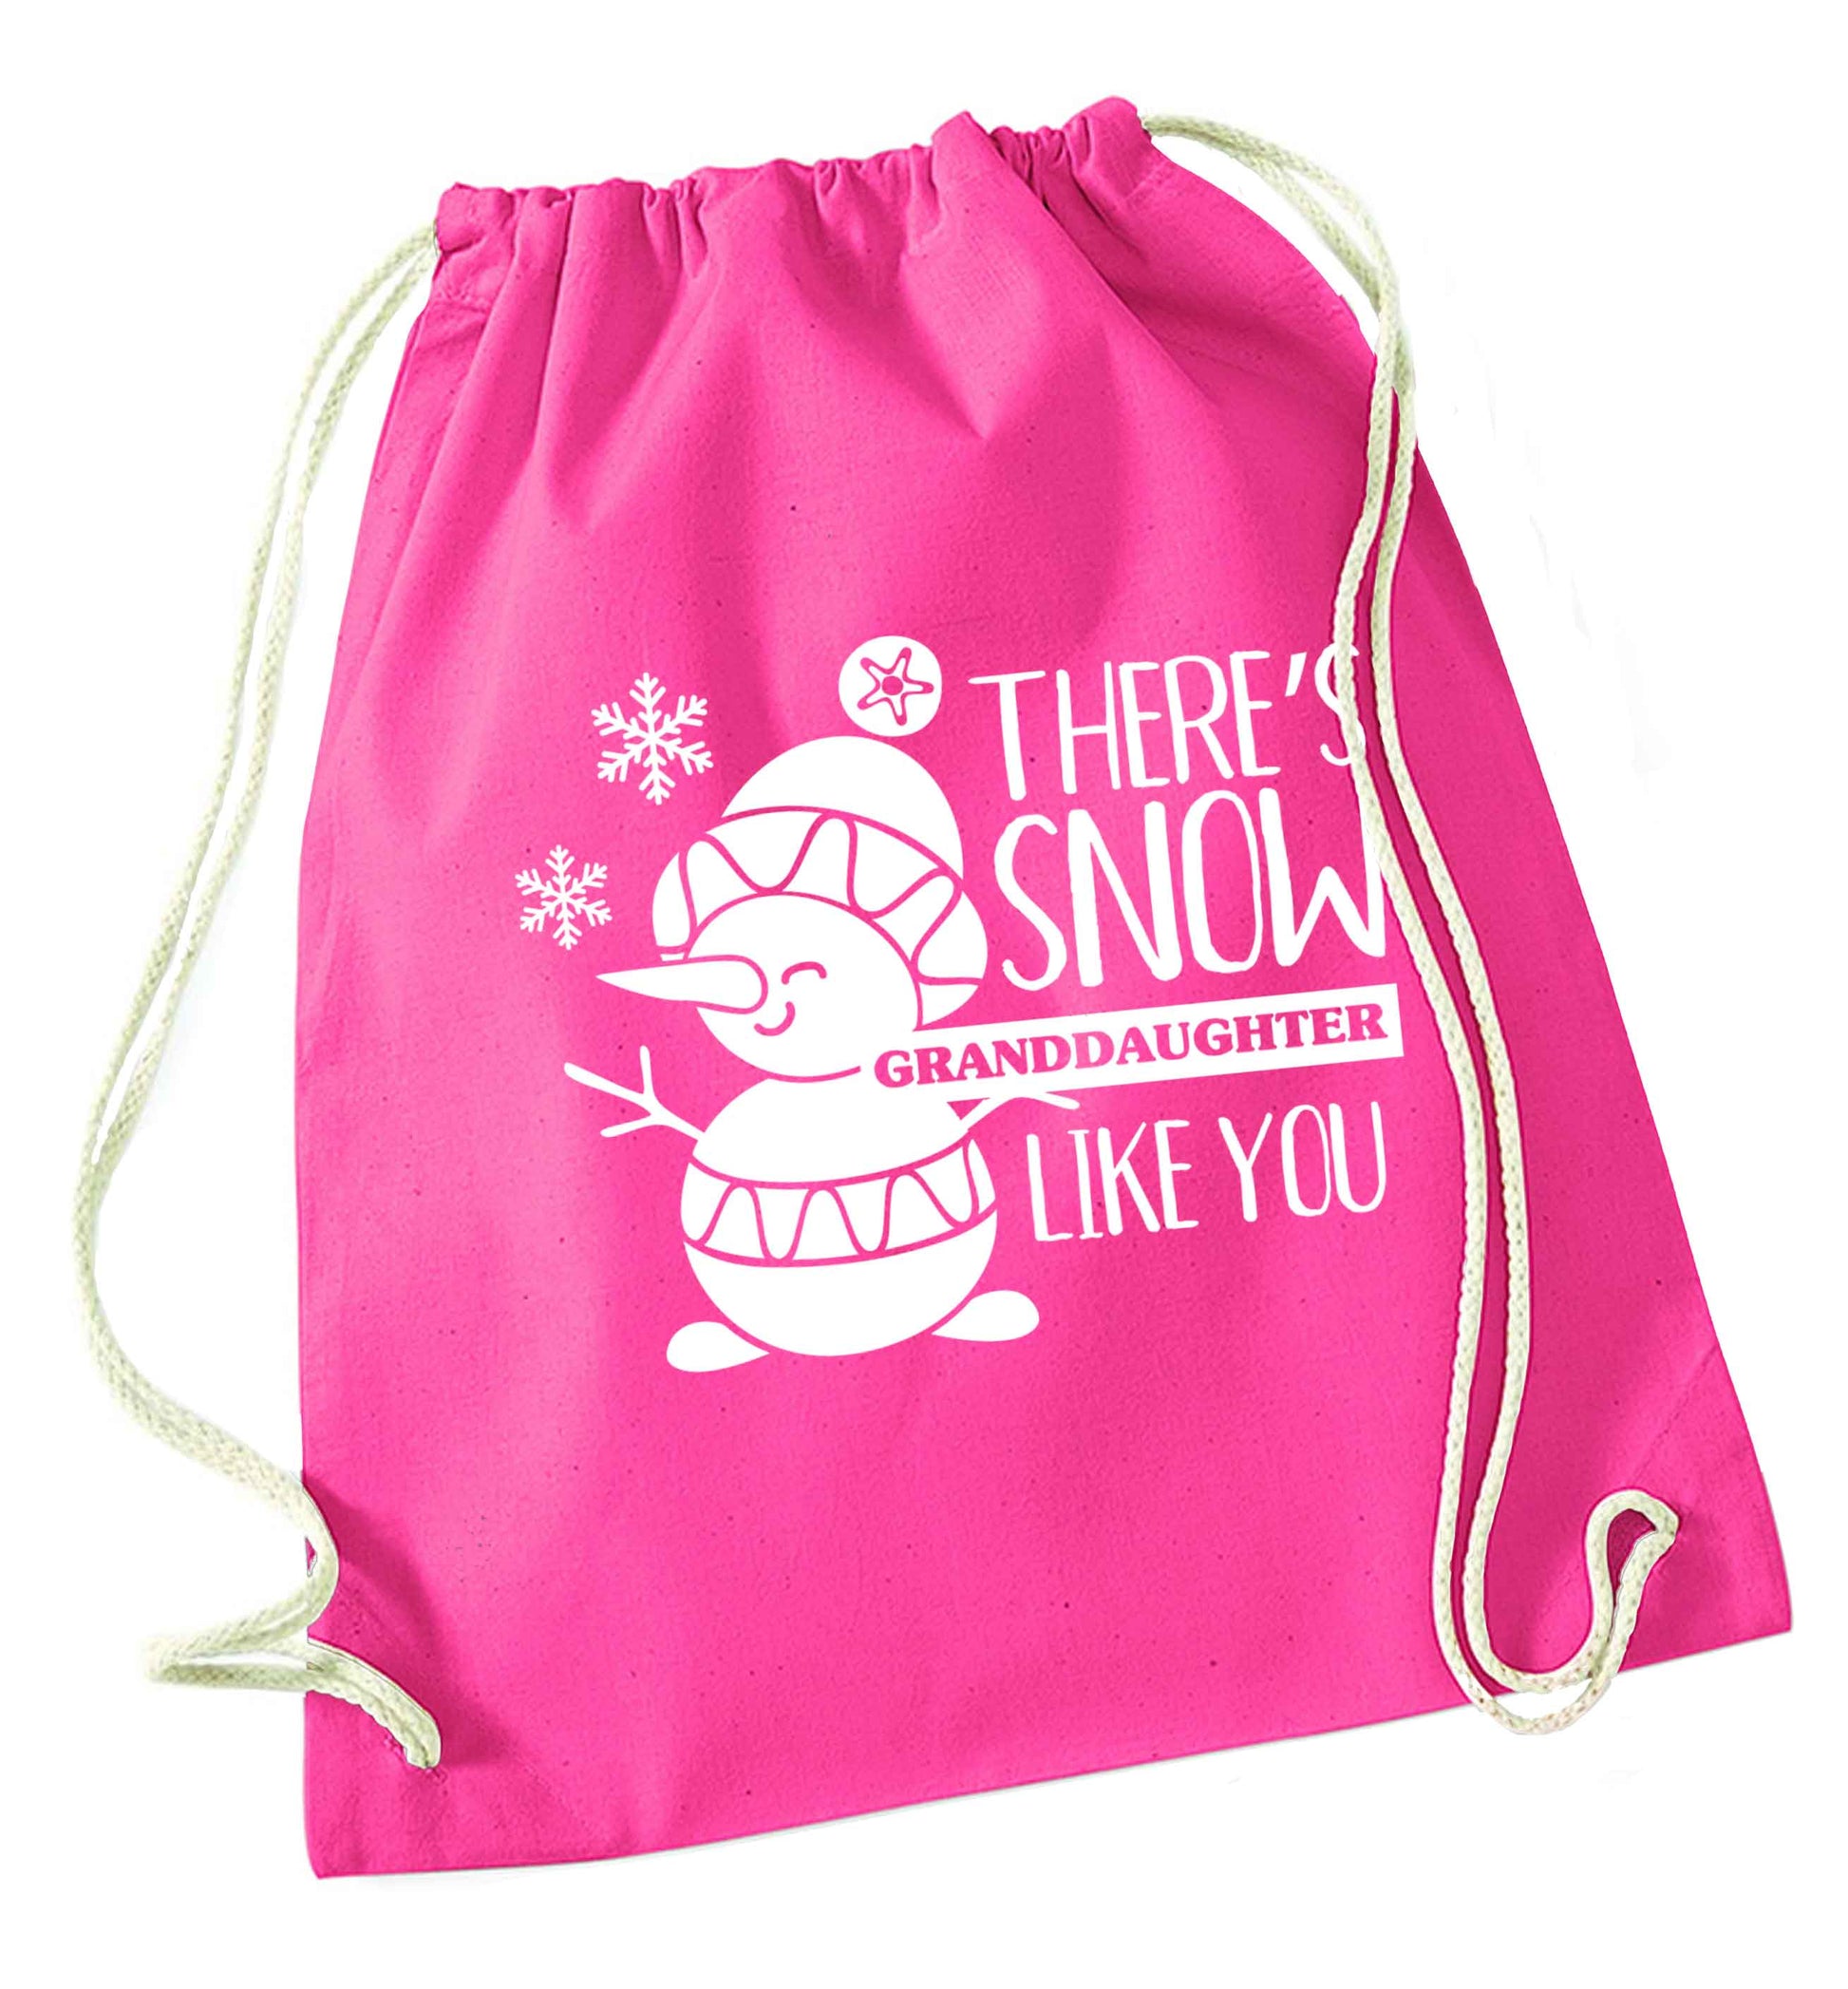 There's snow granddaughter like you pink drawstring bag